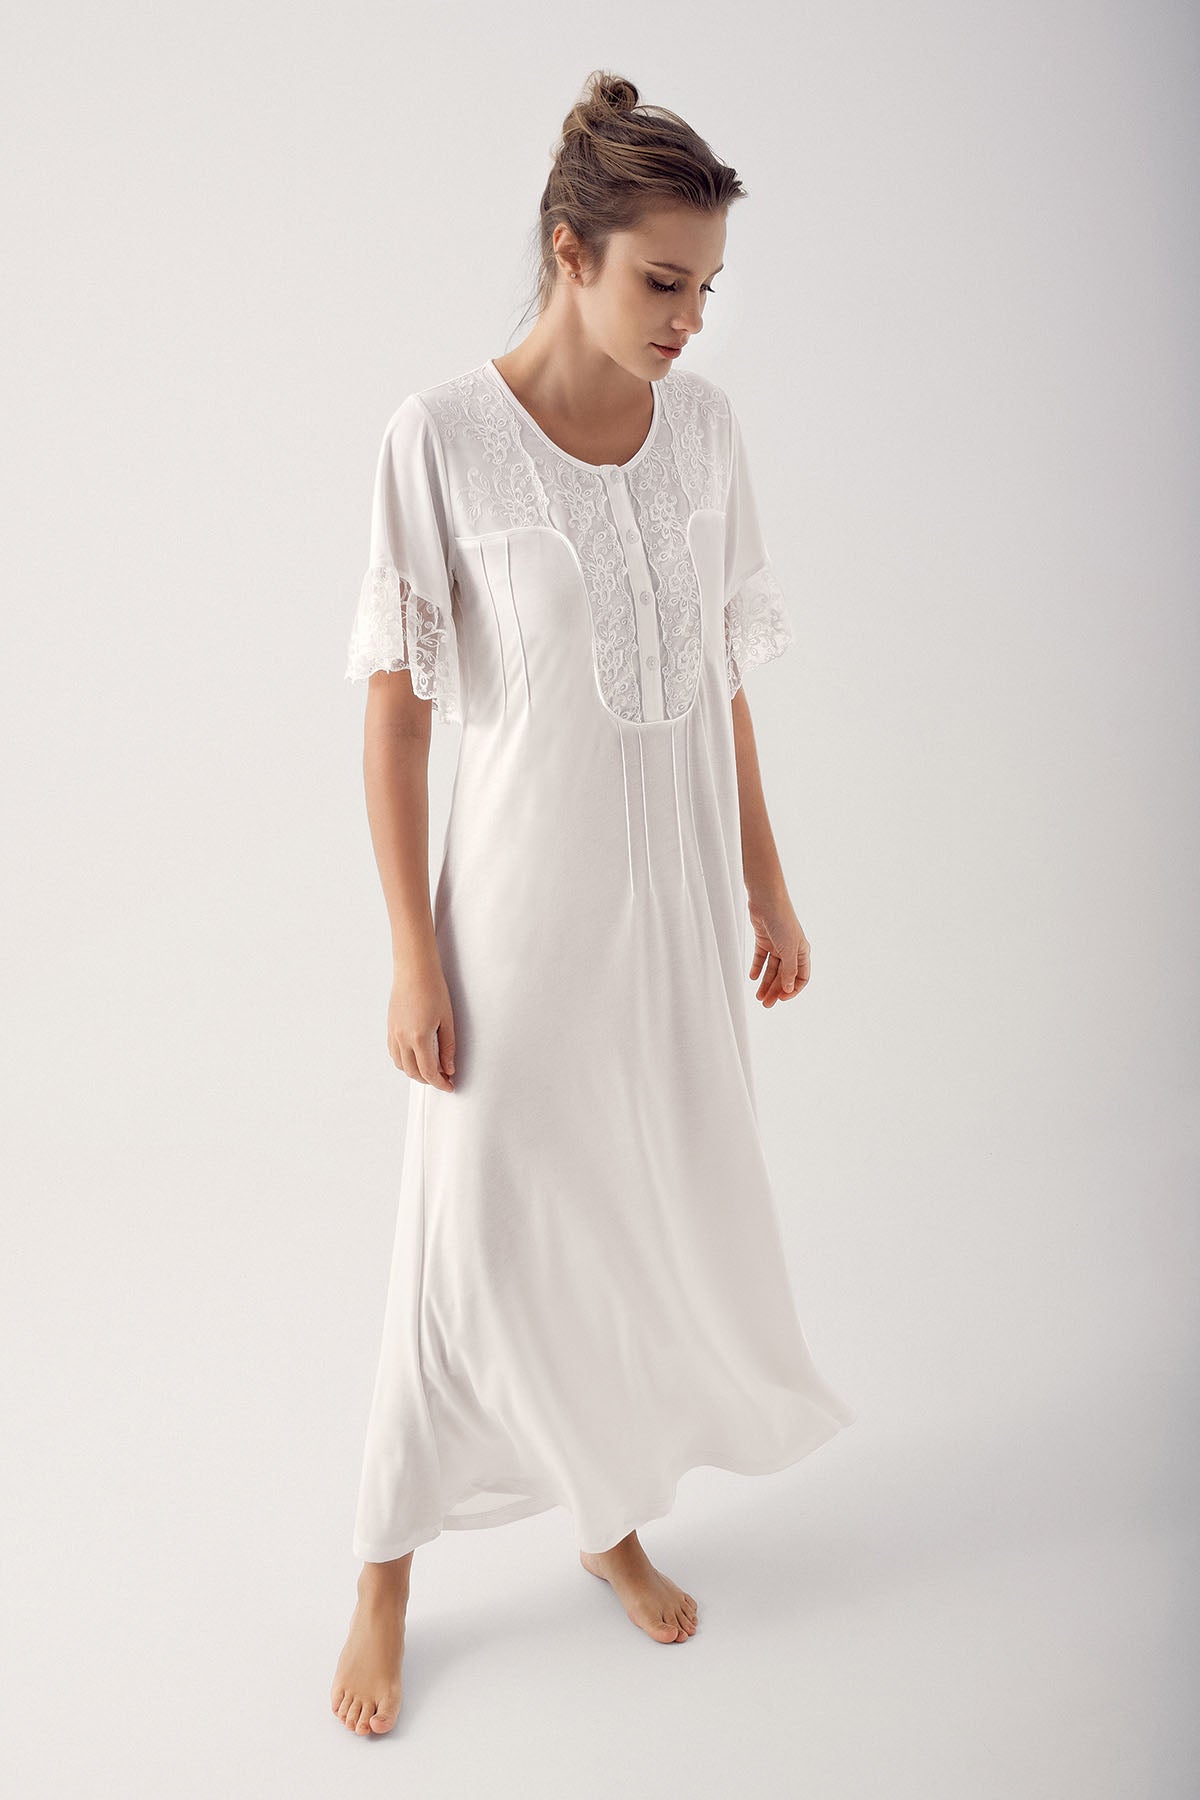 Shopymommy 14105 Collar And Sleeve Lace Maternity & Nursing Nightgown Ecru